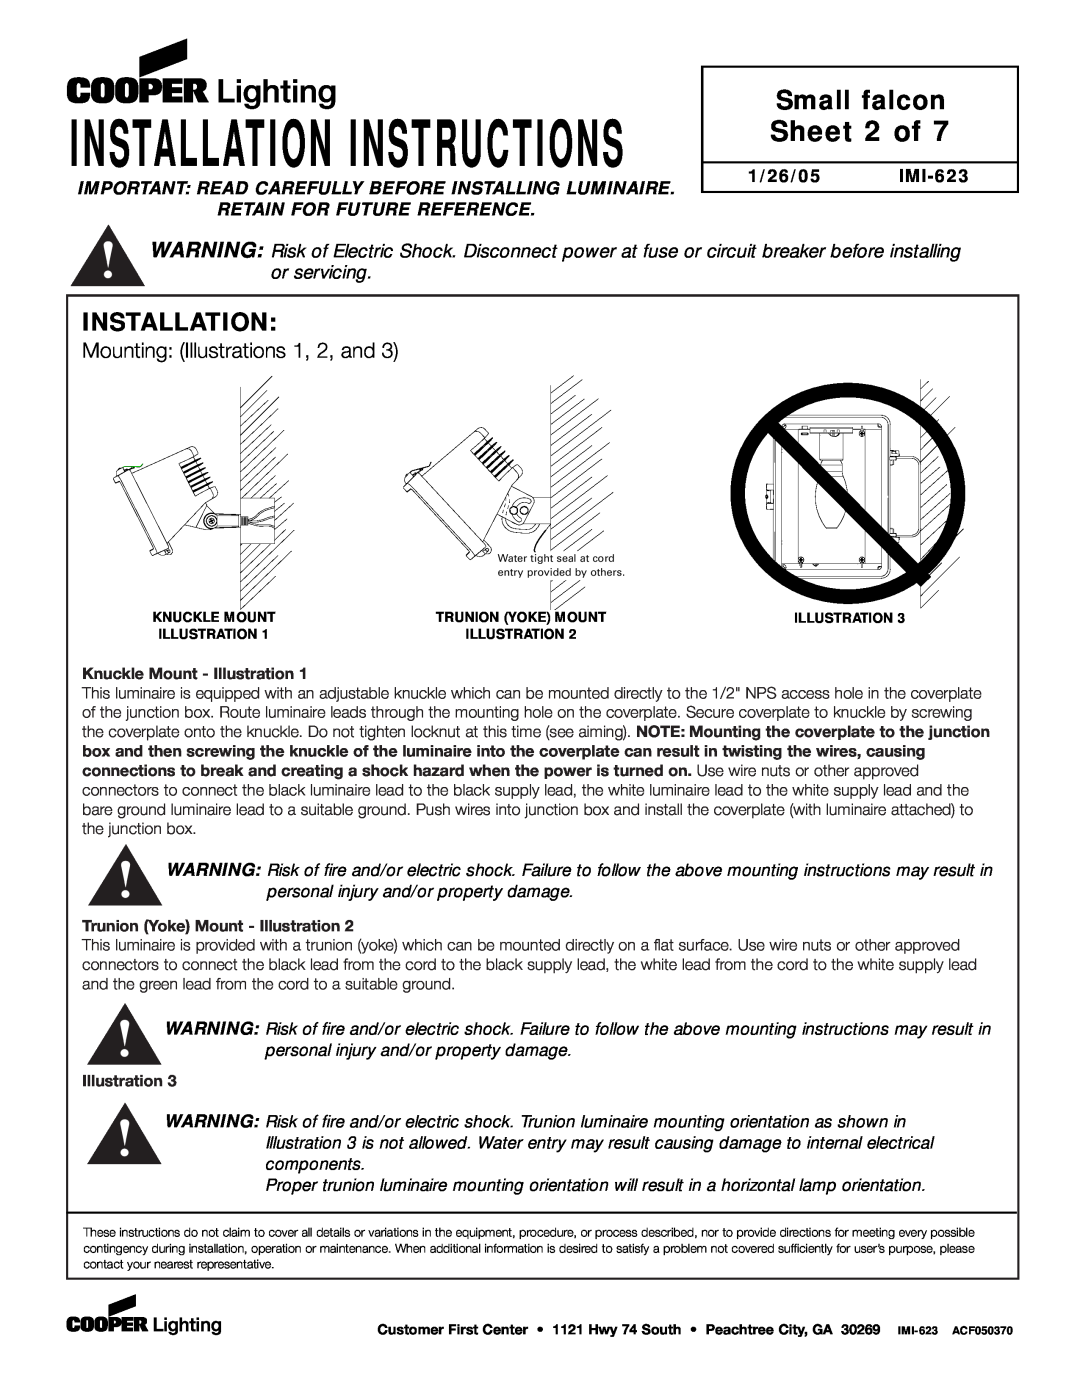 Cooper Lighting P4GE-MX Sheet 2 of, Small falcon, Installation Instructions, Mounting Illustrations 1, 2, and 